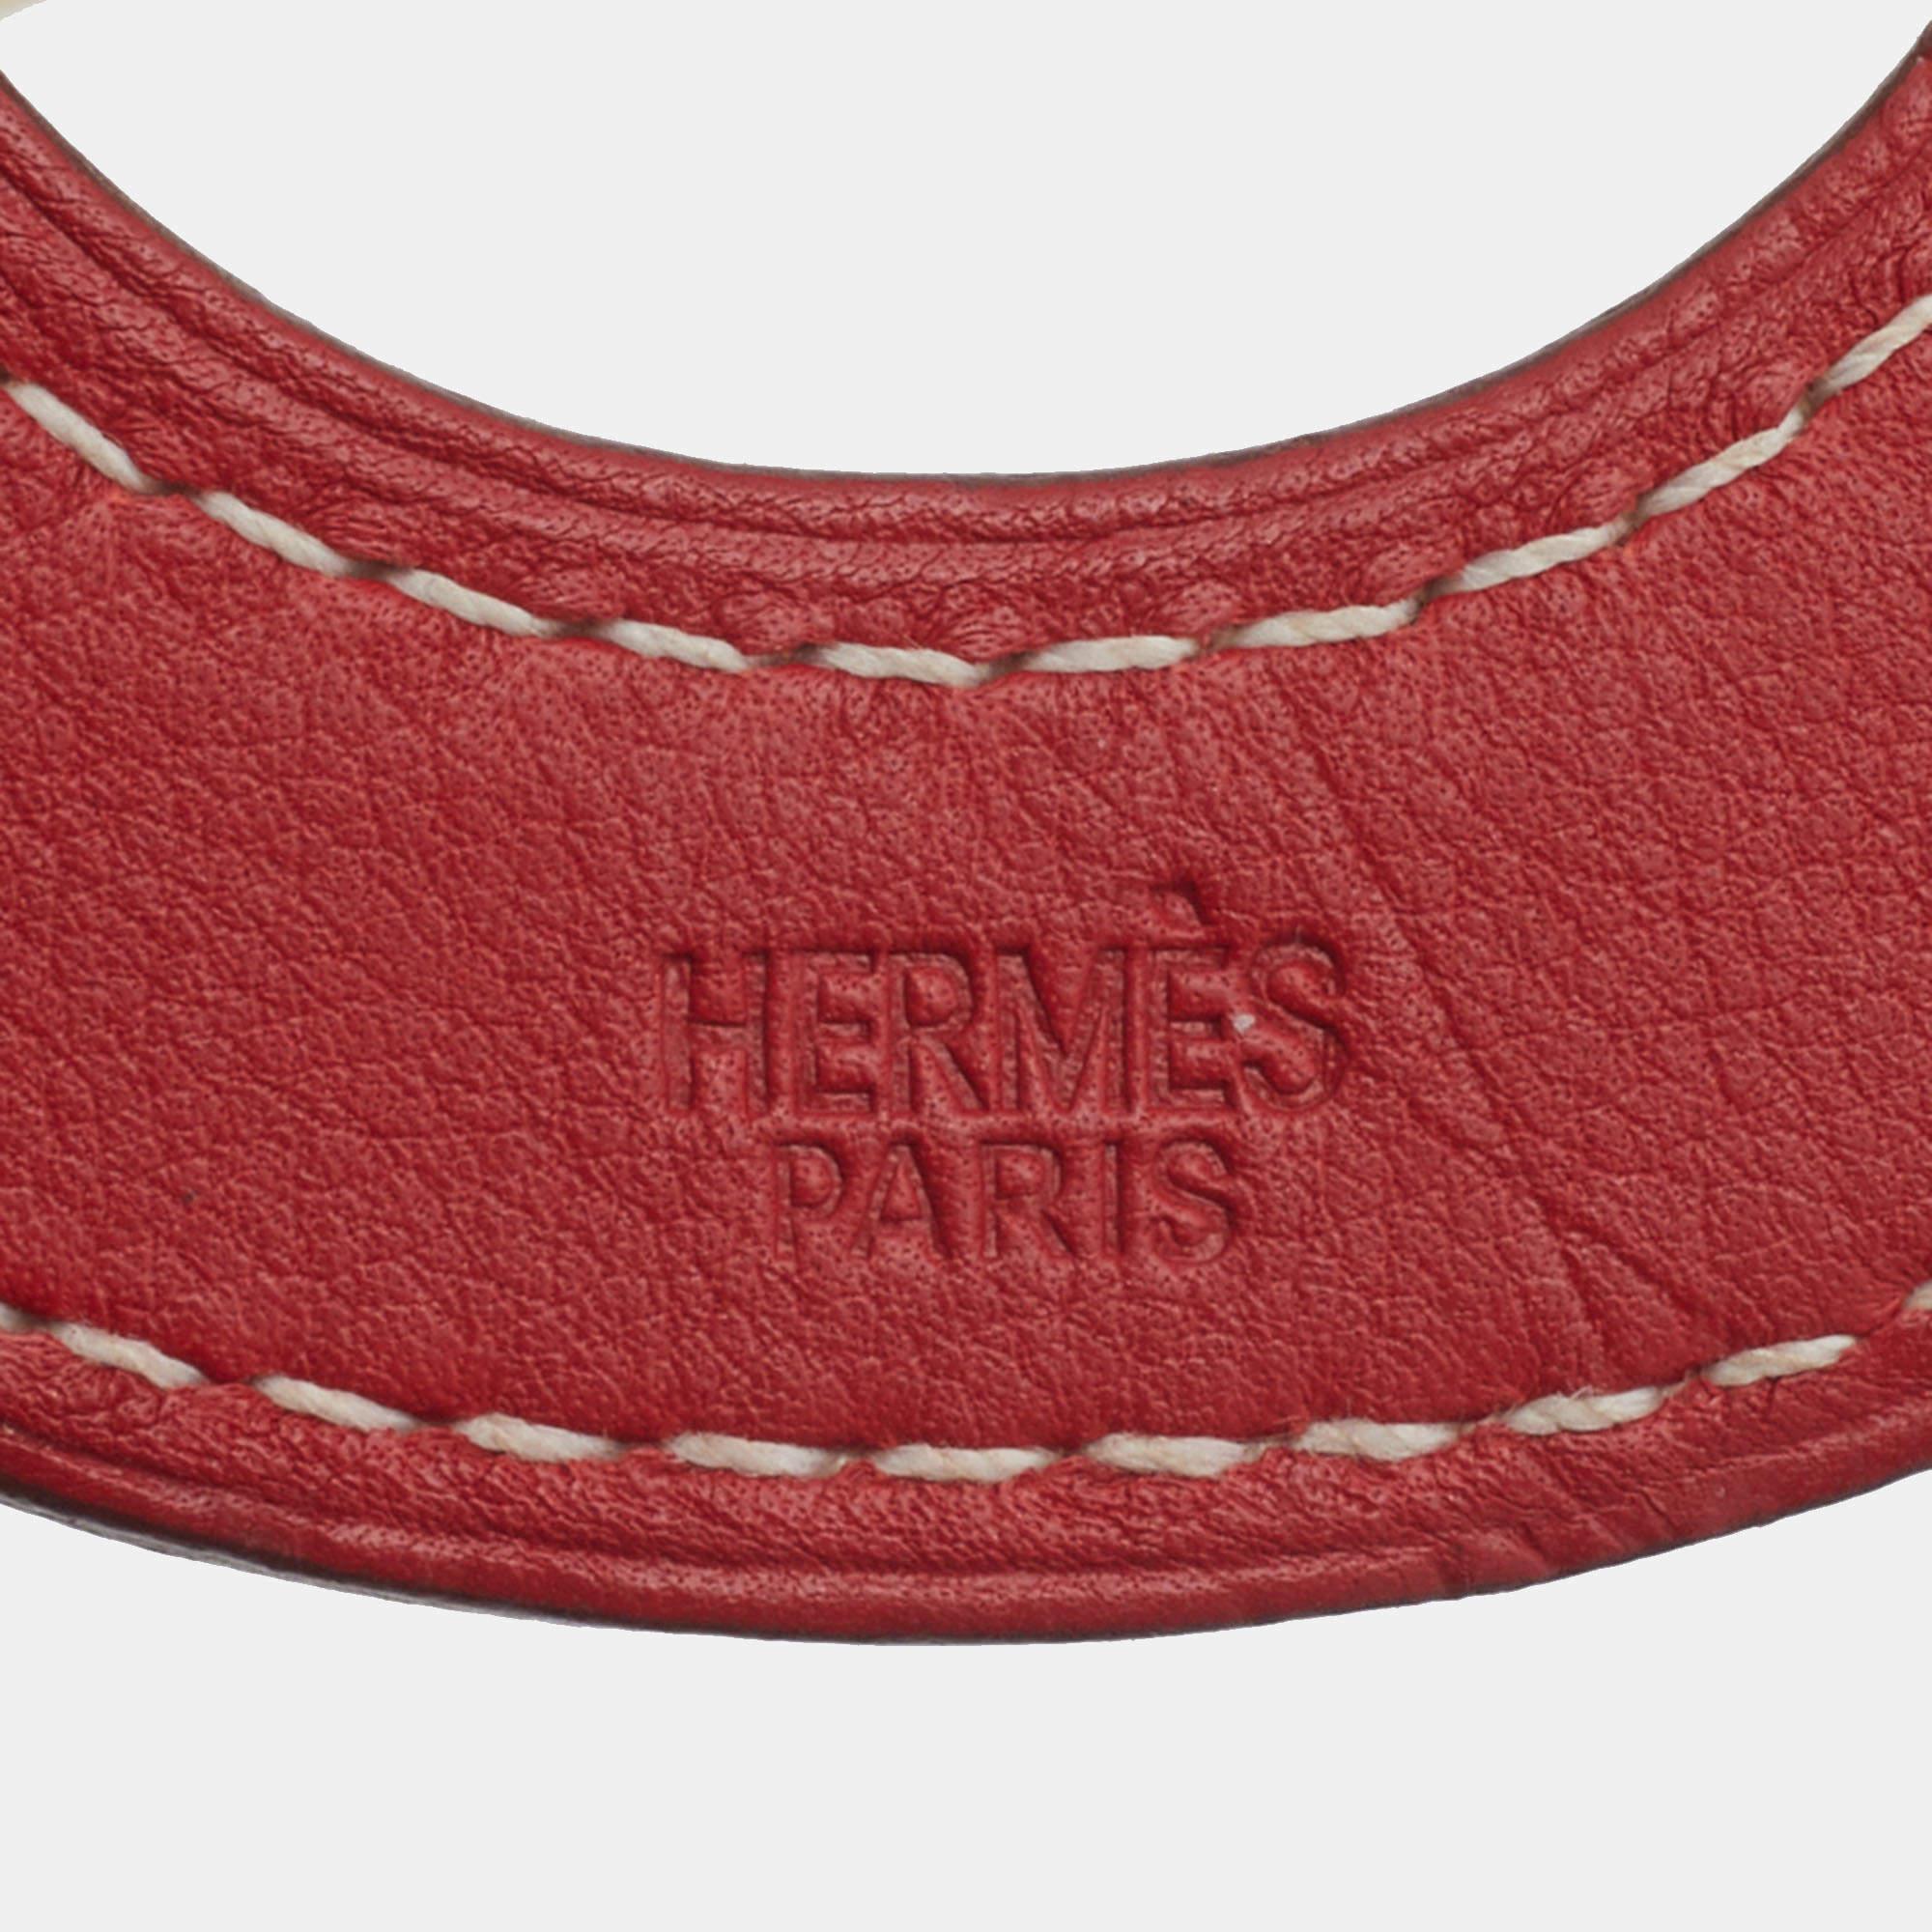 Define your neck with this super-stylish necklace by Hermes. It is a masterfully-crafted creation that promises to hold its beauty and value for a long time.

Includes: Original Dustbag

